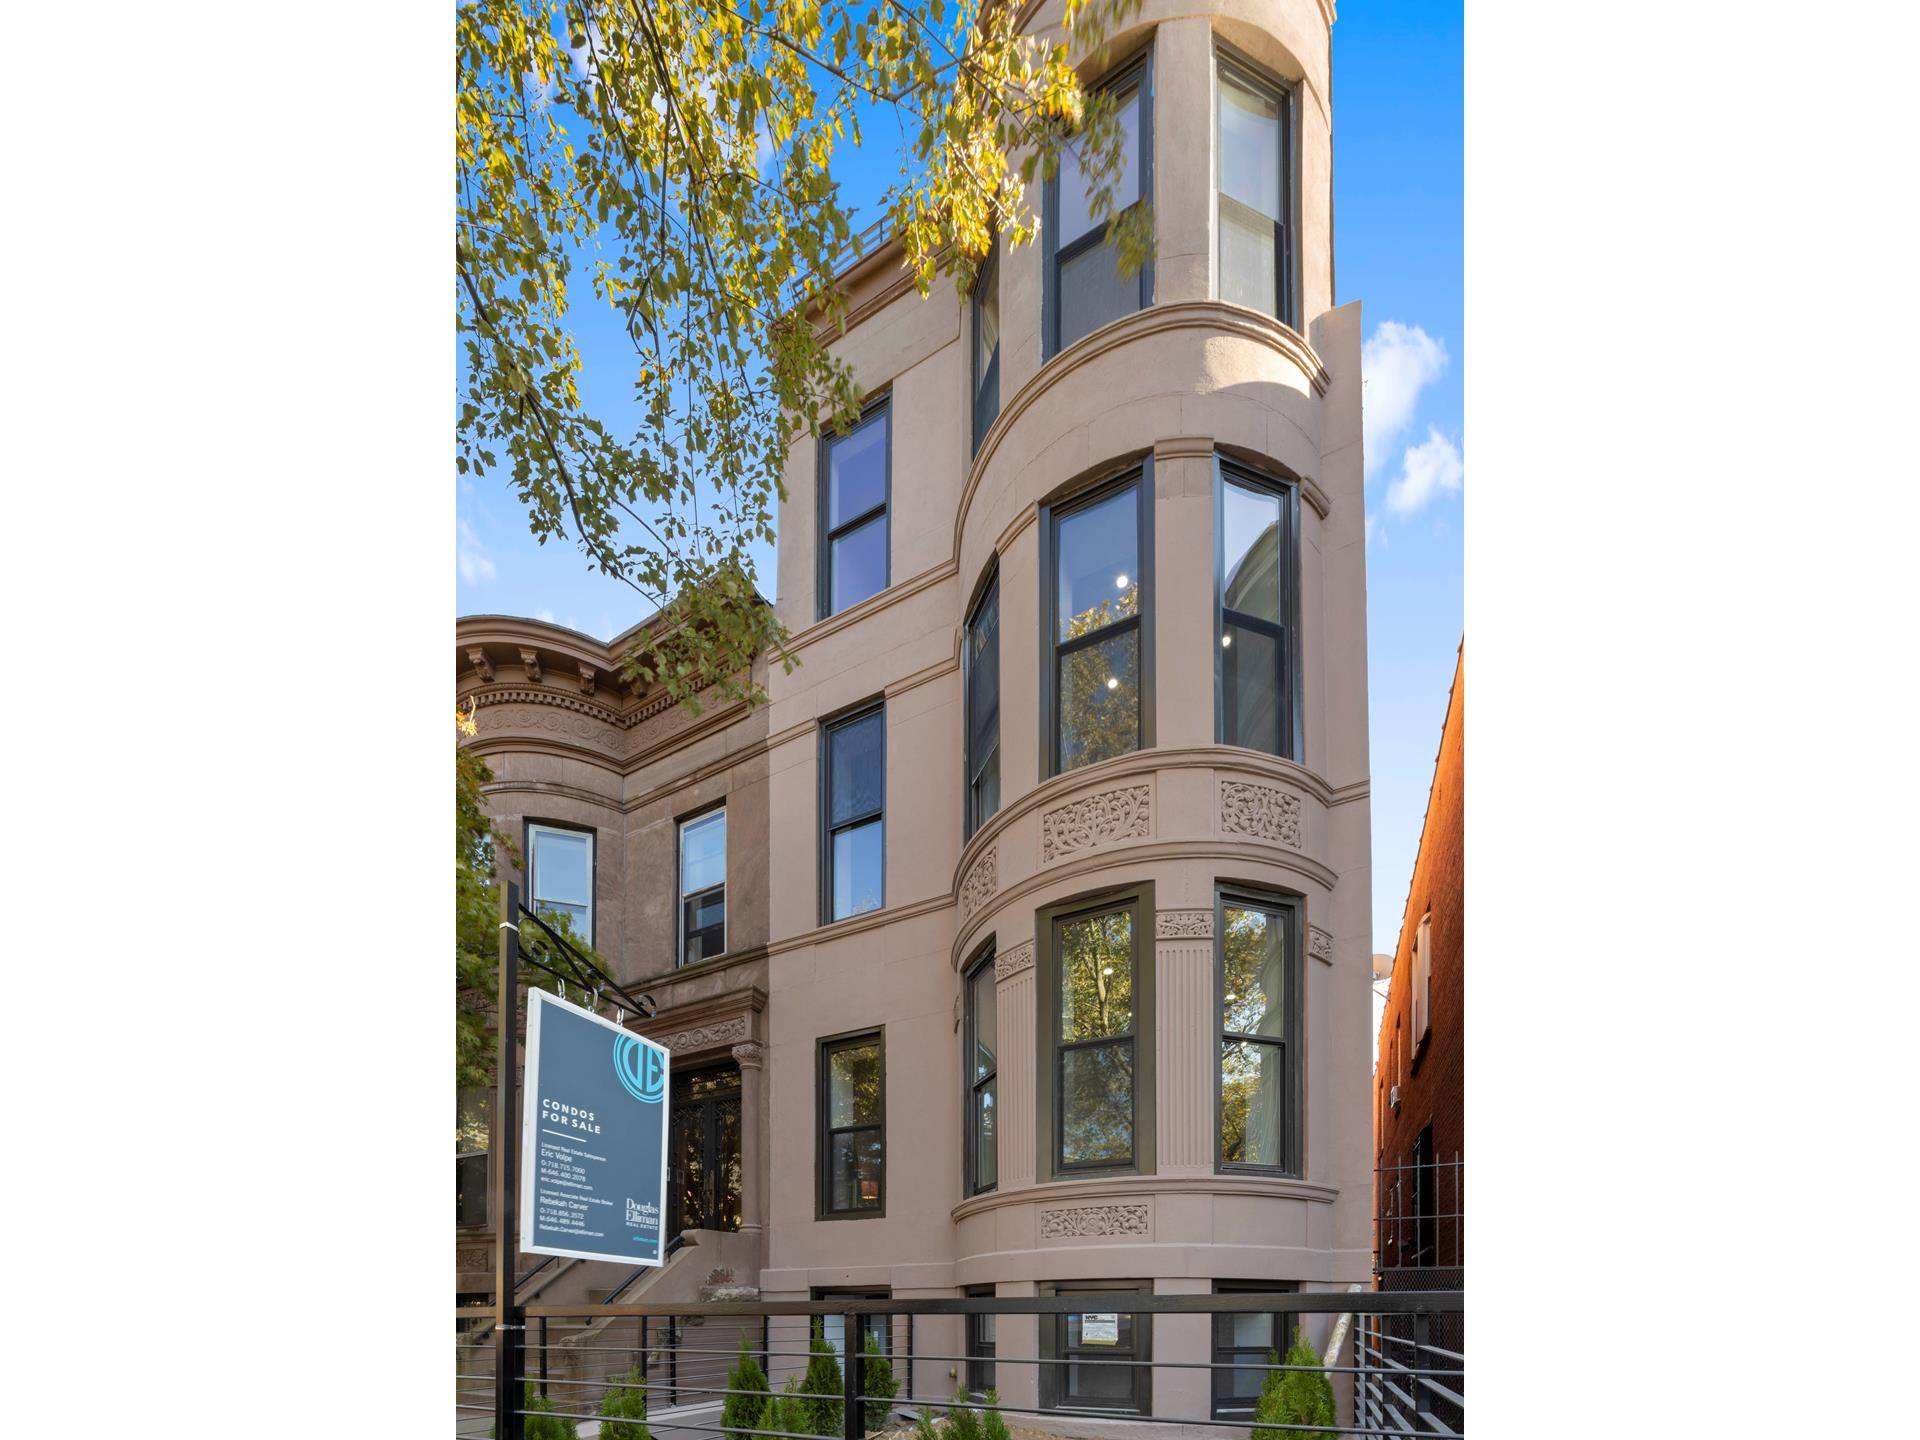 Contracts Out Welcome to 1090 Carroll Street a 7 unit condo in a converted pre war brownstone located in trendy Crown Heights and just blocks from Prospect Park and numerous ...